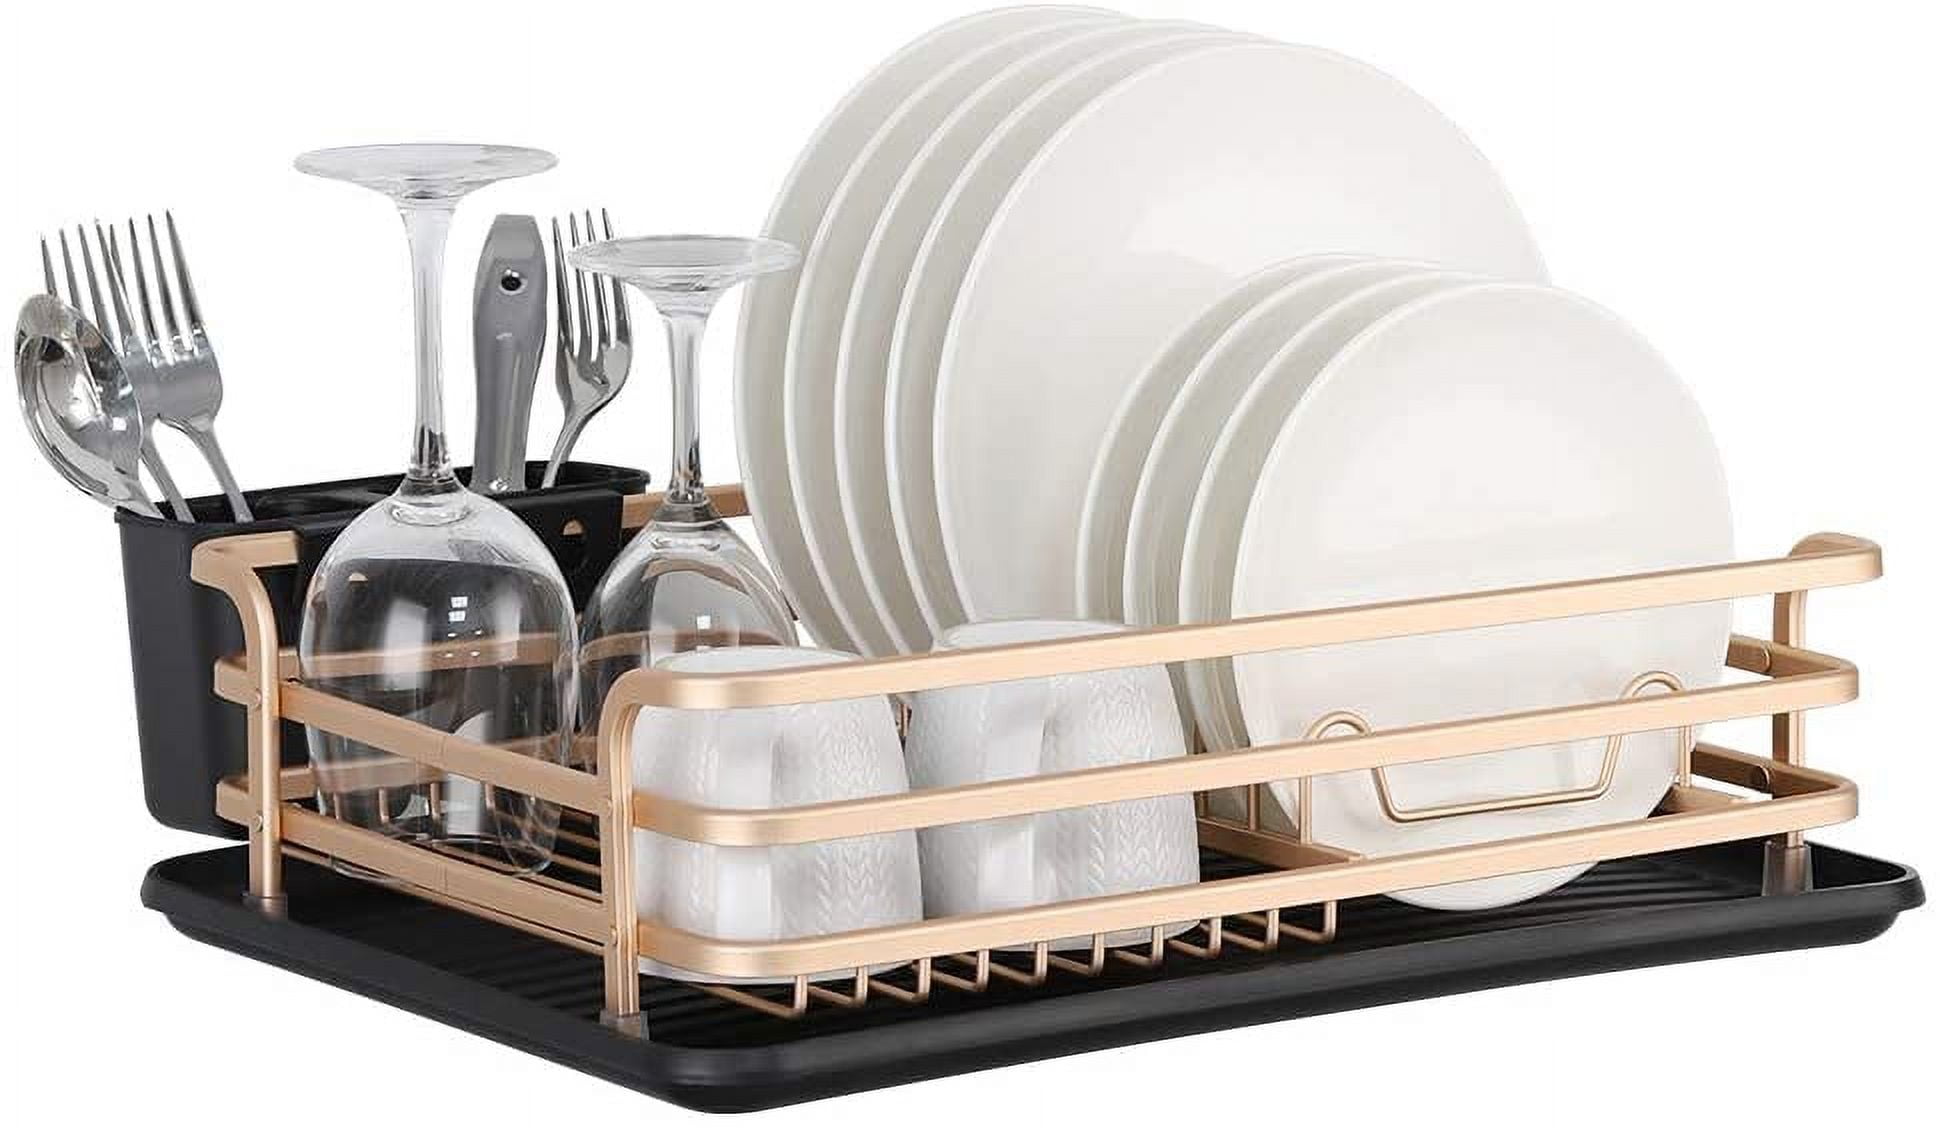 KINGRACK Dish Rack, Large Capacity Dish Drainer, Dish Drying Rack with Cutlery Holder, Removable Drip Tray, Cup Holder, Compact Kitchen Drainers for